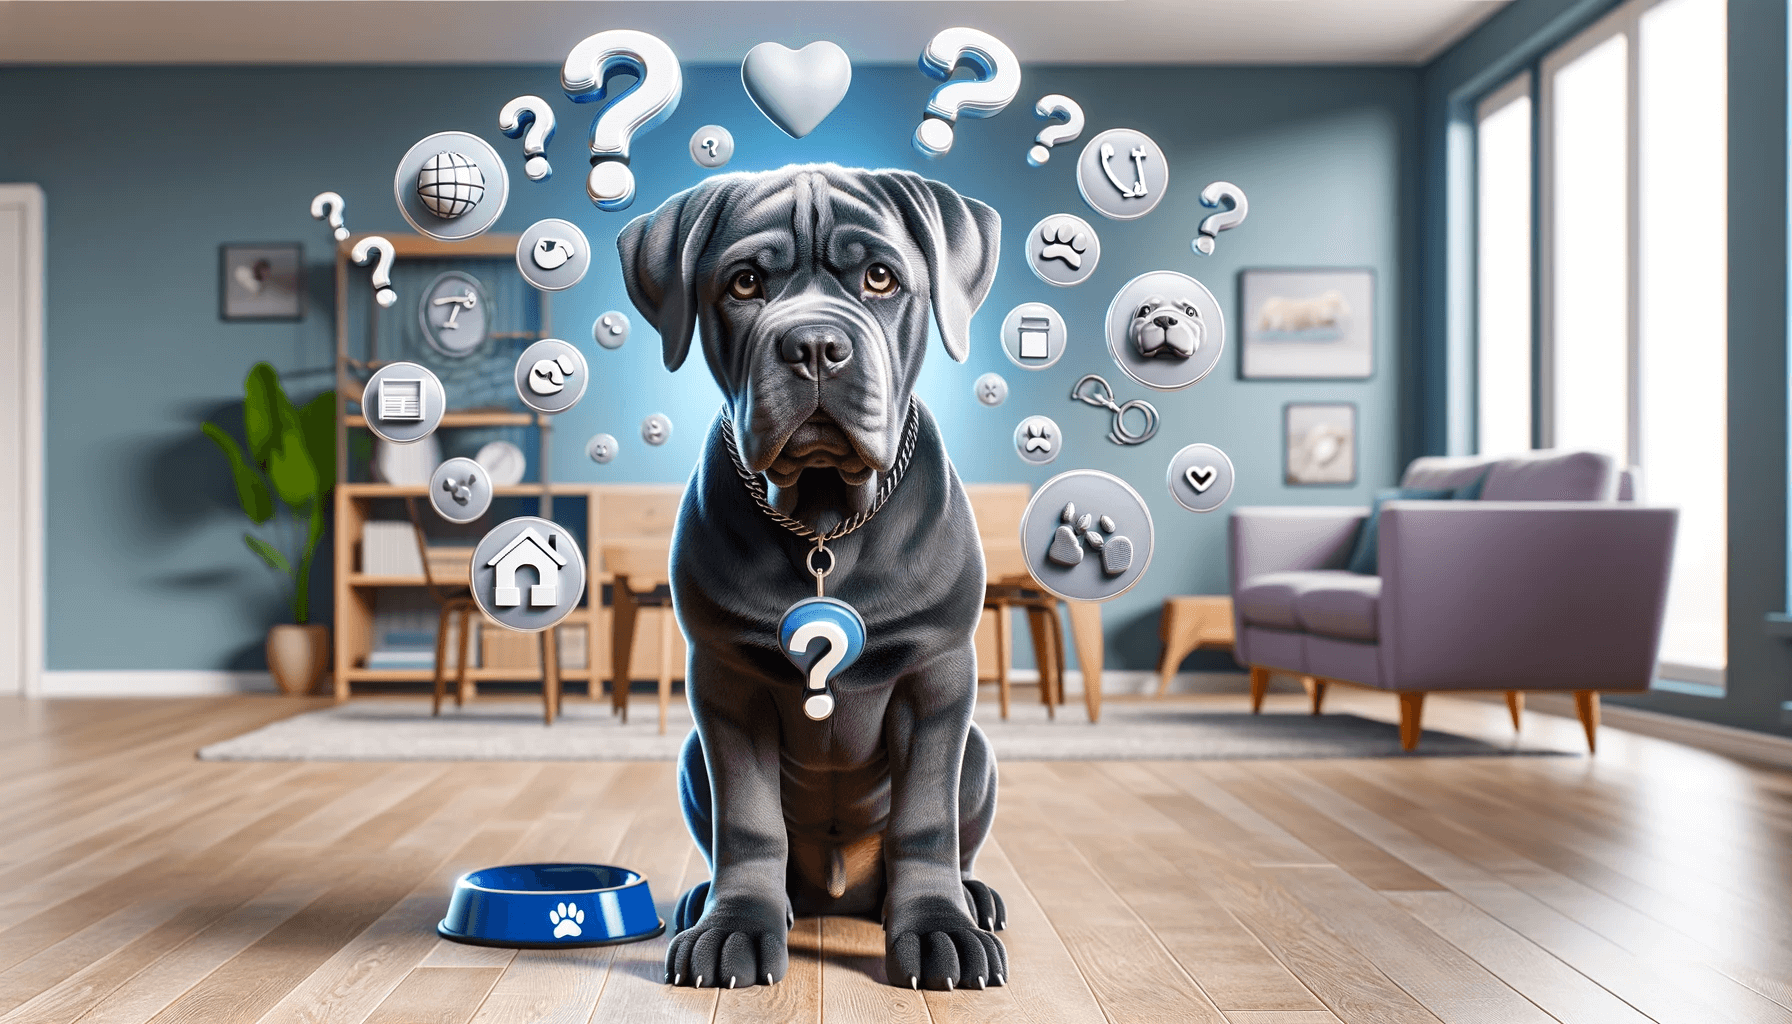 Blue Cane Corso with a question mark above its head, symbolizing frequently asked questions about the breed.